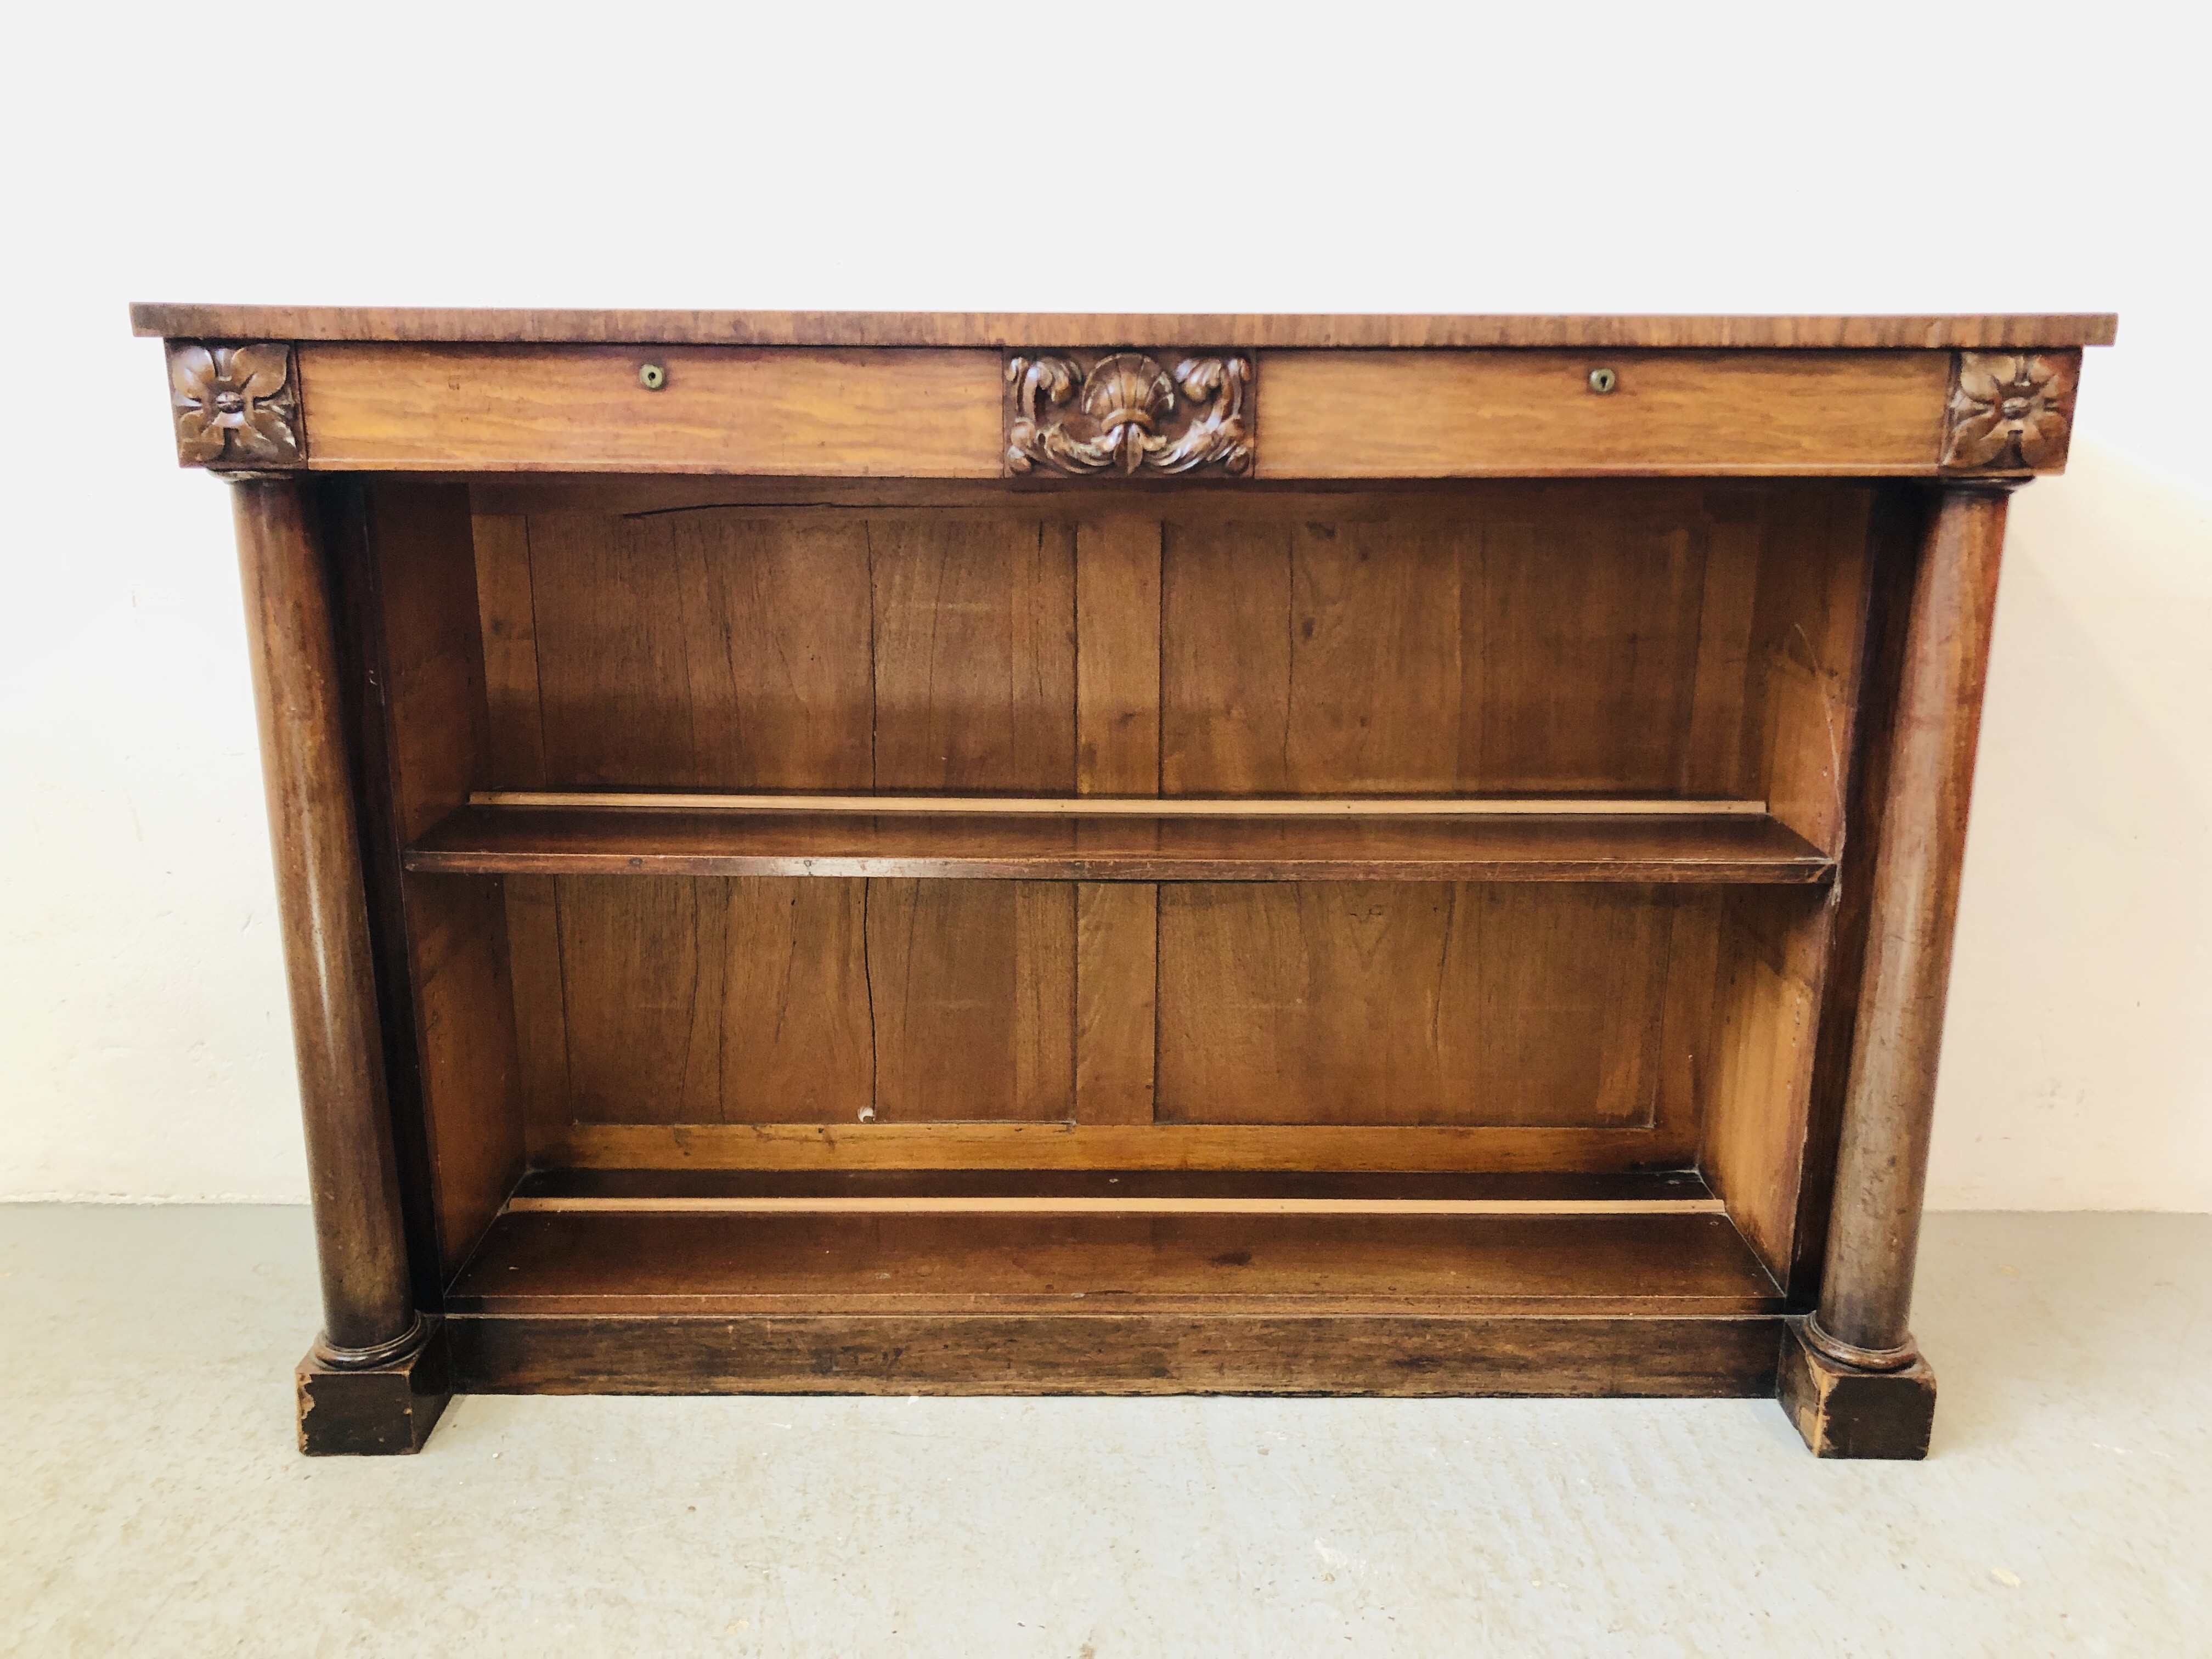 PERIOD MAHOGANY 2 DRAWER BOOKCASE WITH COLUMN SUPPORTS, CENTRAL CREST (SOME LOSES) W 137CM, H 92CM, - Image 2 of 8